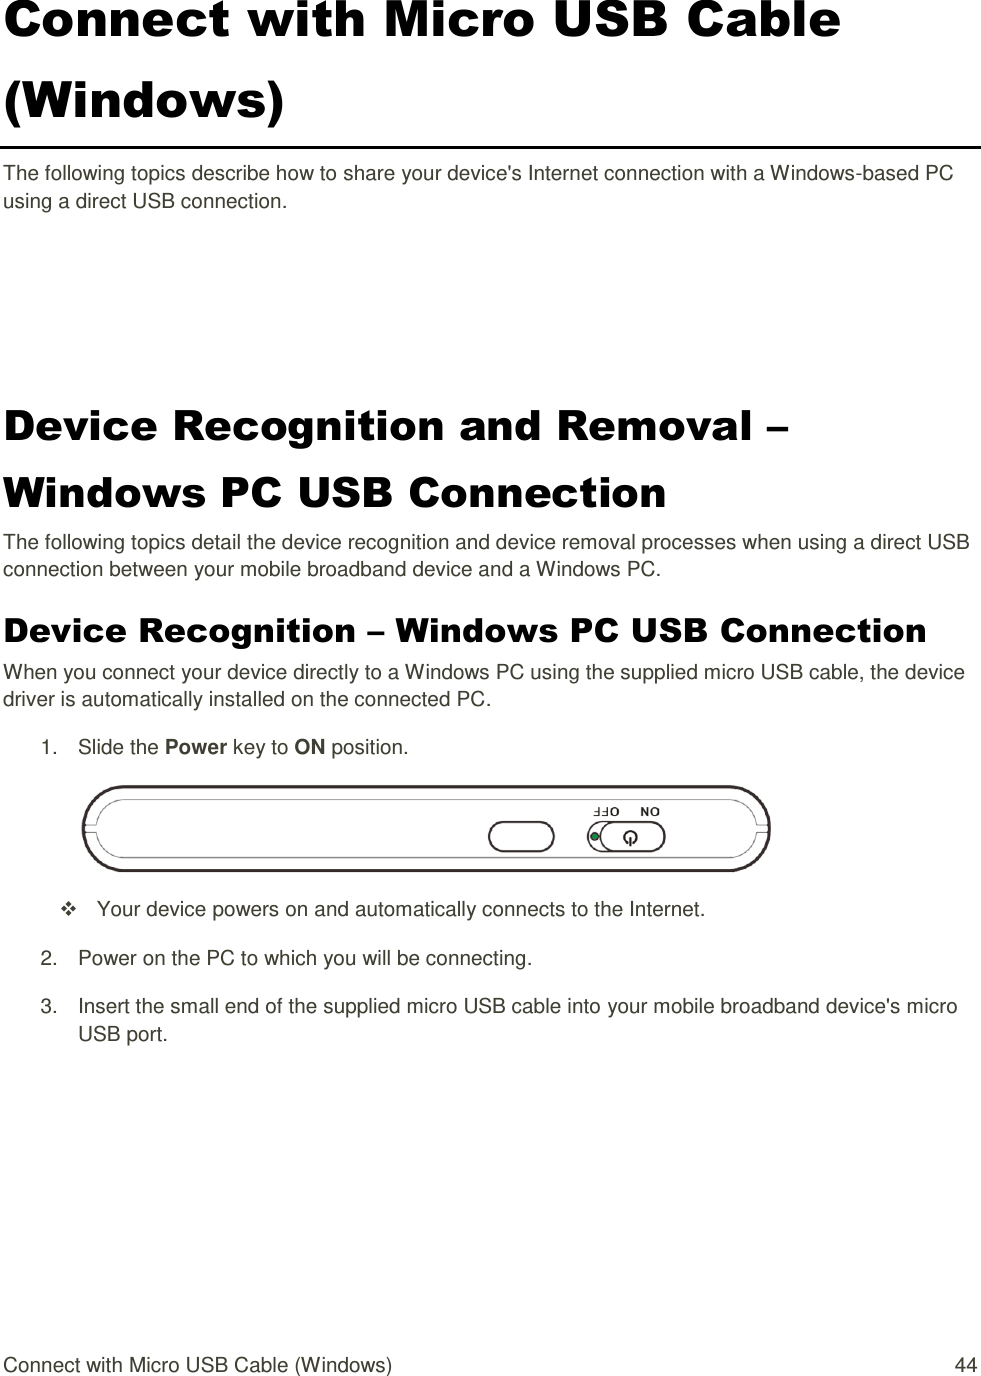 Connect with Micro USB Cable (Windows)  44 Connect with Micro USB Cable (Windows) The following topics describe how to share your device&apos;s Internet connection with a Windows-based PC using a direct USB connection. Device Recognition and Removal – Windows PC USB Connection The following topics detail the device recognition and device removal processes when using a direct USB connection between your mobile broadband device and a Windows PC. Device Recognition – Windows PC USB Connection When you connect your device directly to a Windows PC using the supplied micro USB cable, the device driver is automatically installed on the connected PC. 1.  Slide the Power key to ON position.    Your device powers on and automatically connects to the Internet. 2.  Power on the PC to which you will be connecting. 3.  Insert the small end of the supplied micro USB cable into your mobile broadband device&apos;s micro USB port. 